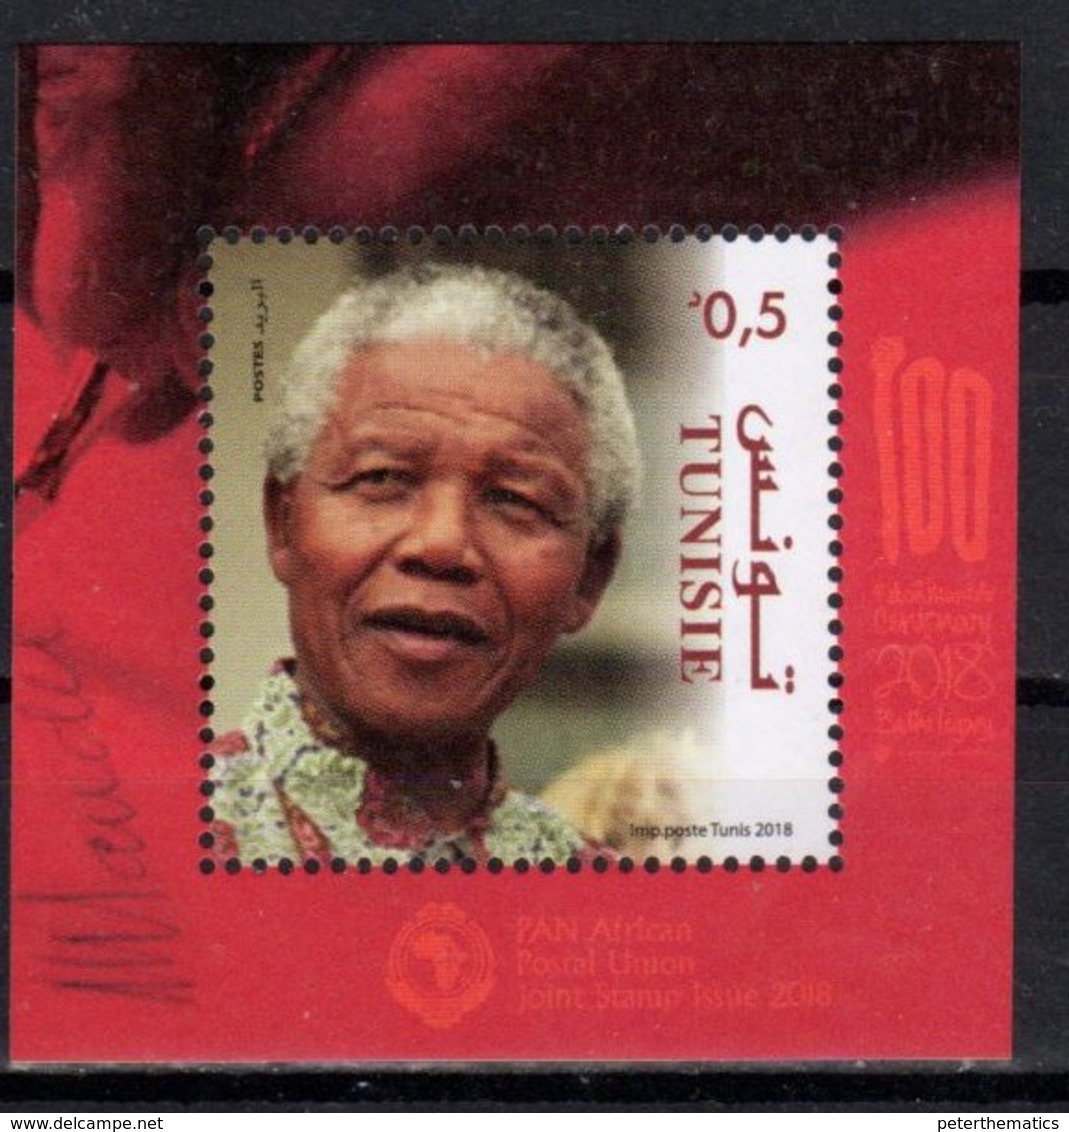 TUNISIA, 2018,MNH, JOINT ISSUE, NELSON MANDELA, S/SHEET - Joint Issues